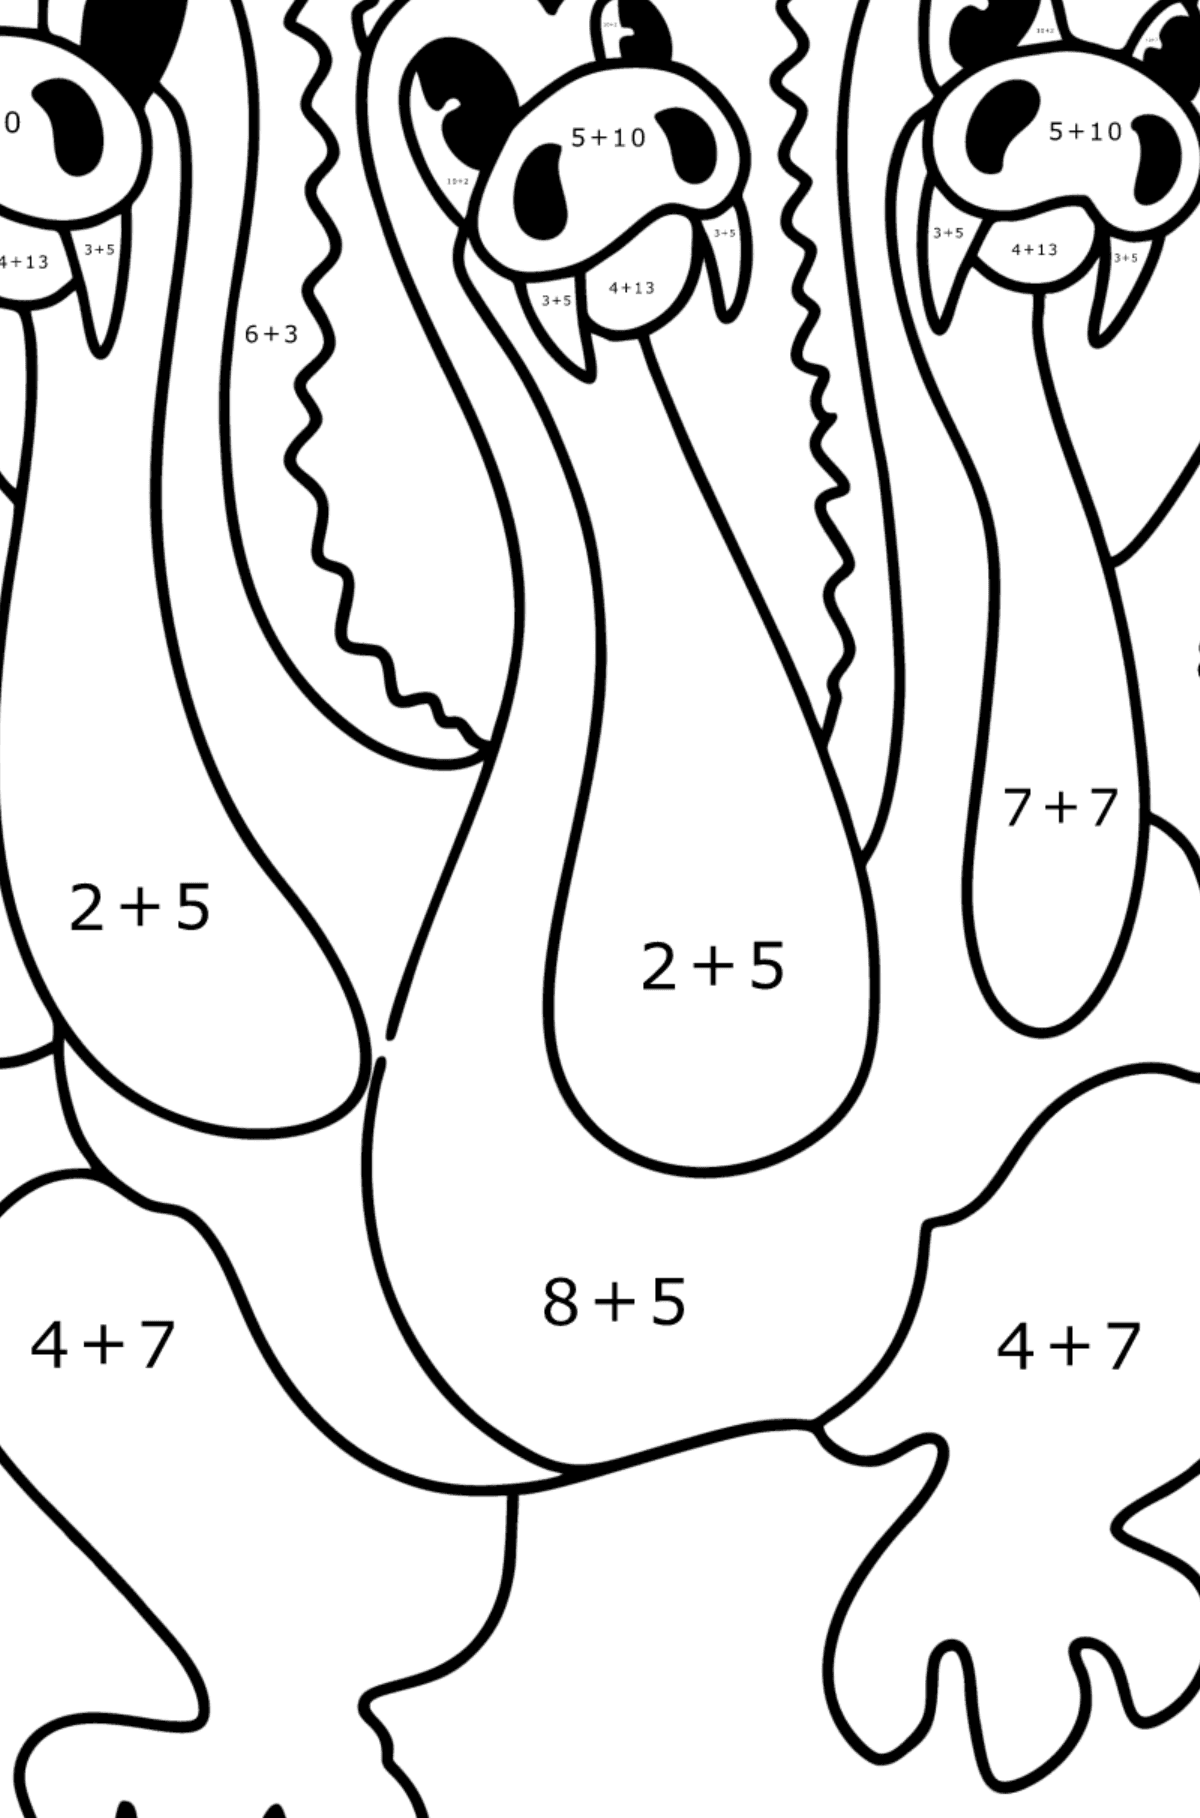 Fairy dragon coloring page - Math Coloring - Addition for Kids